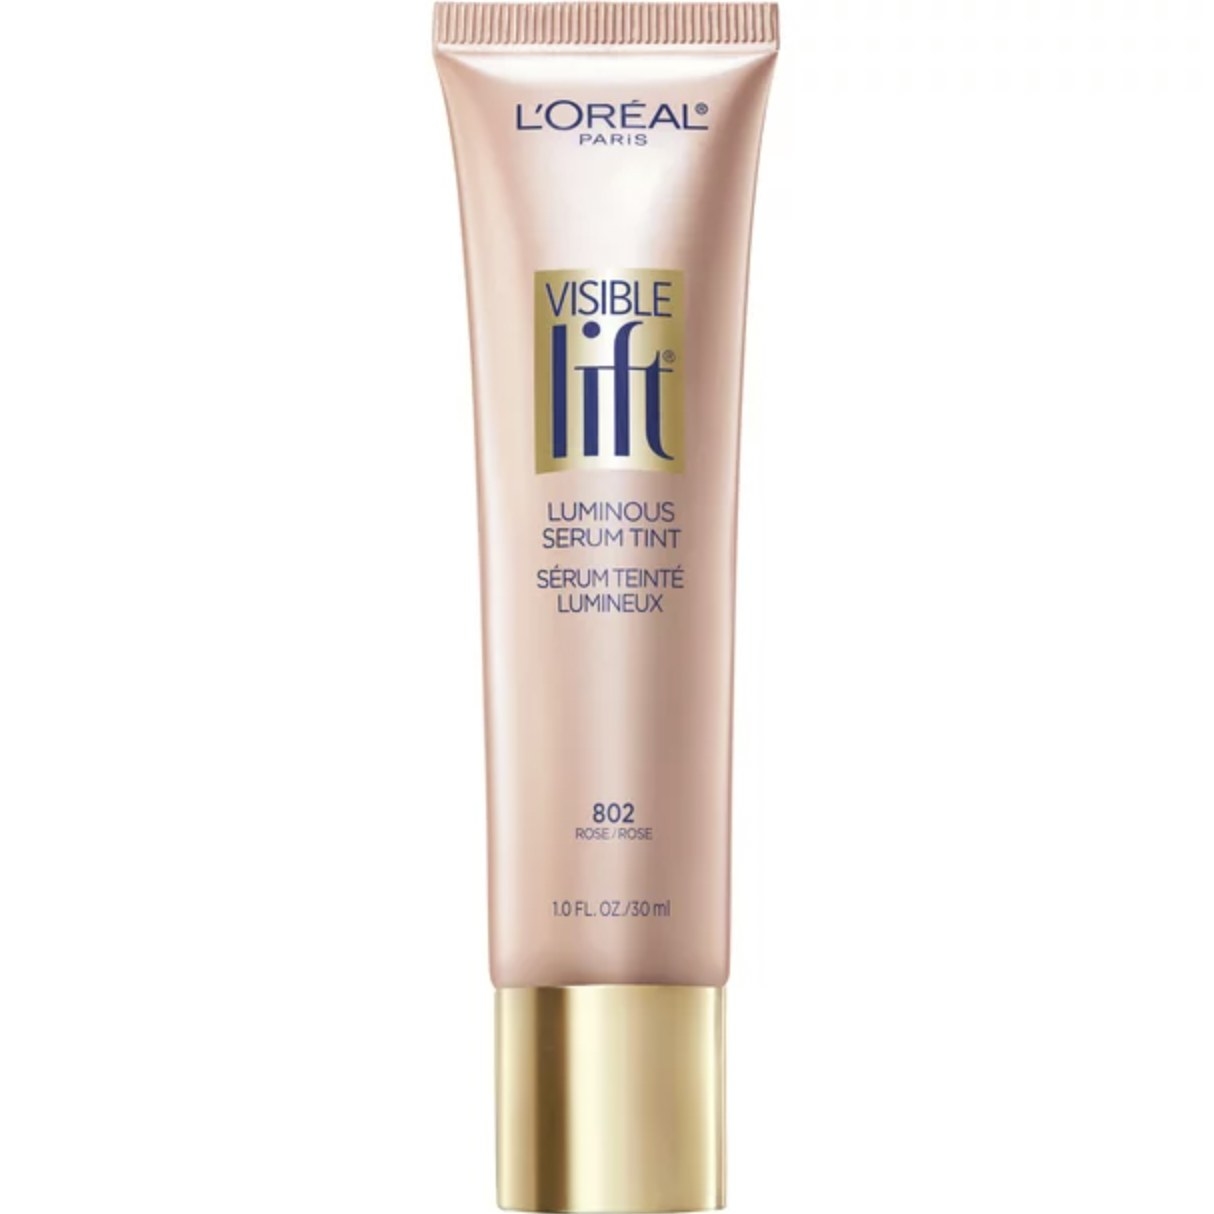 A tube of tinted serum